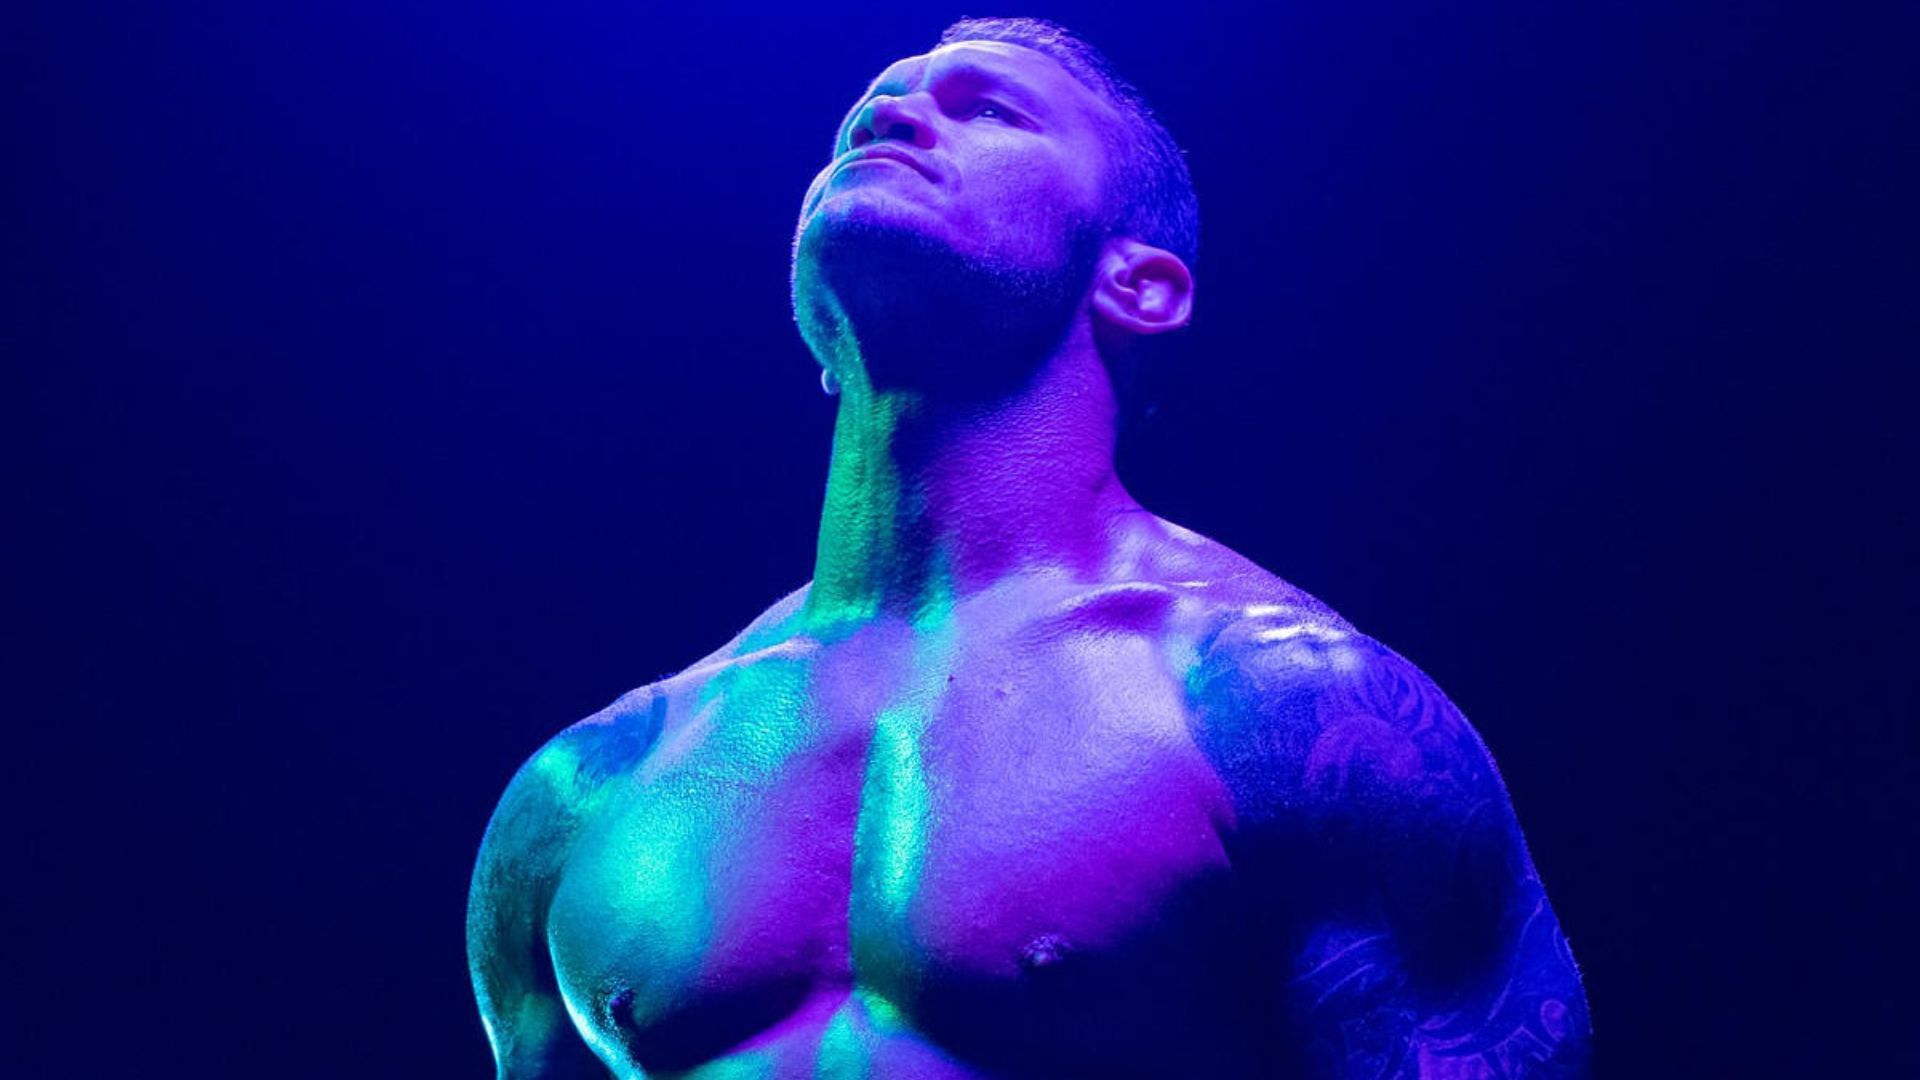 Randy Orton will be looking to further add to his legacy